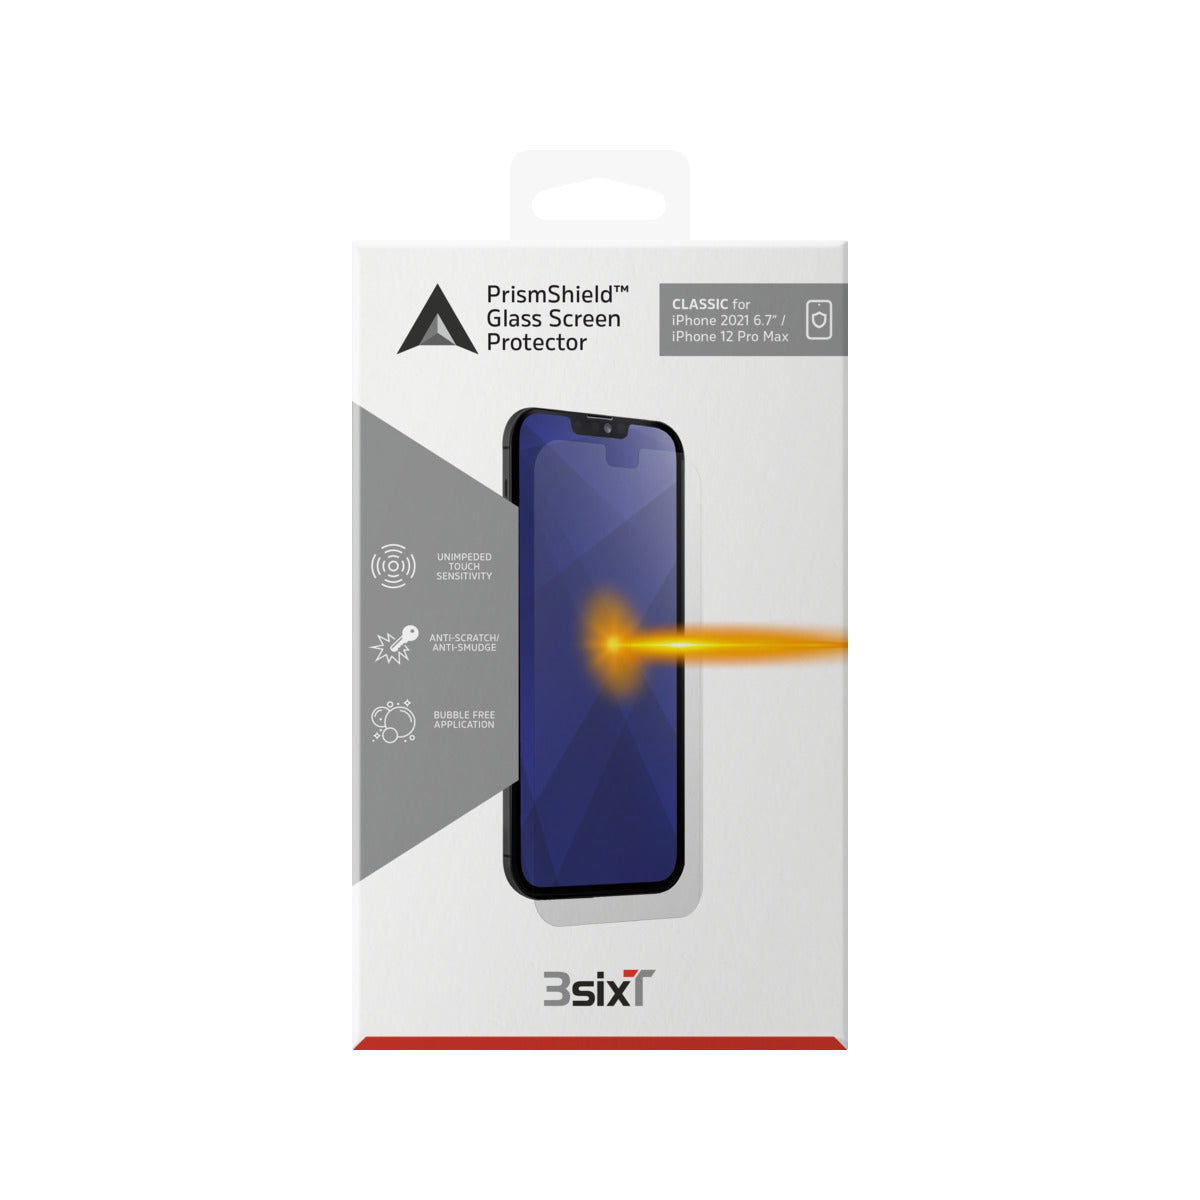 PrismShield™ Classic Glass Screen Protector for iPhone 13 Pro Max.